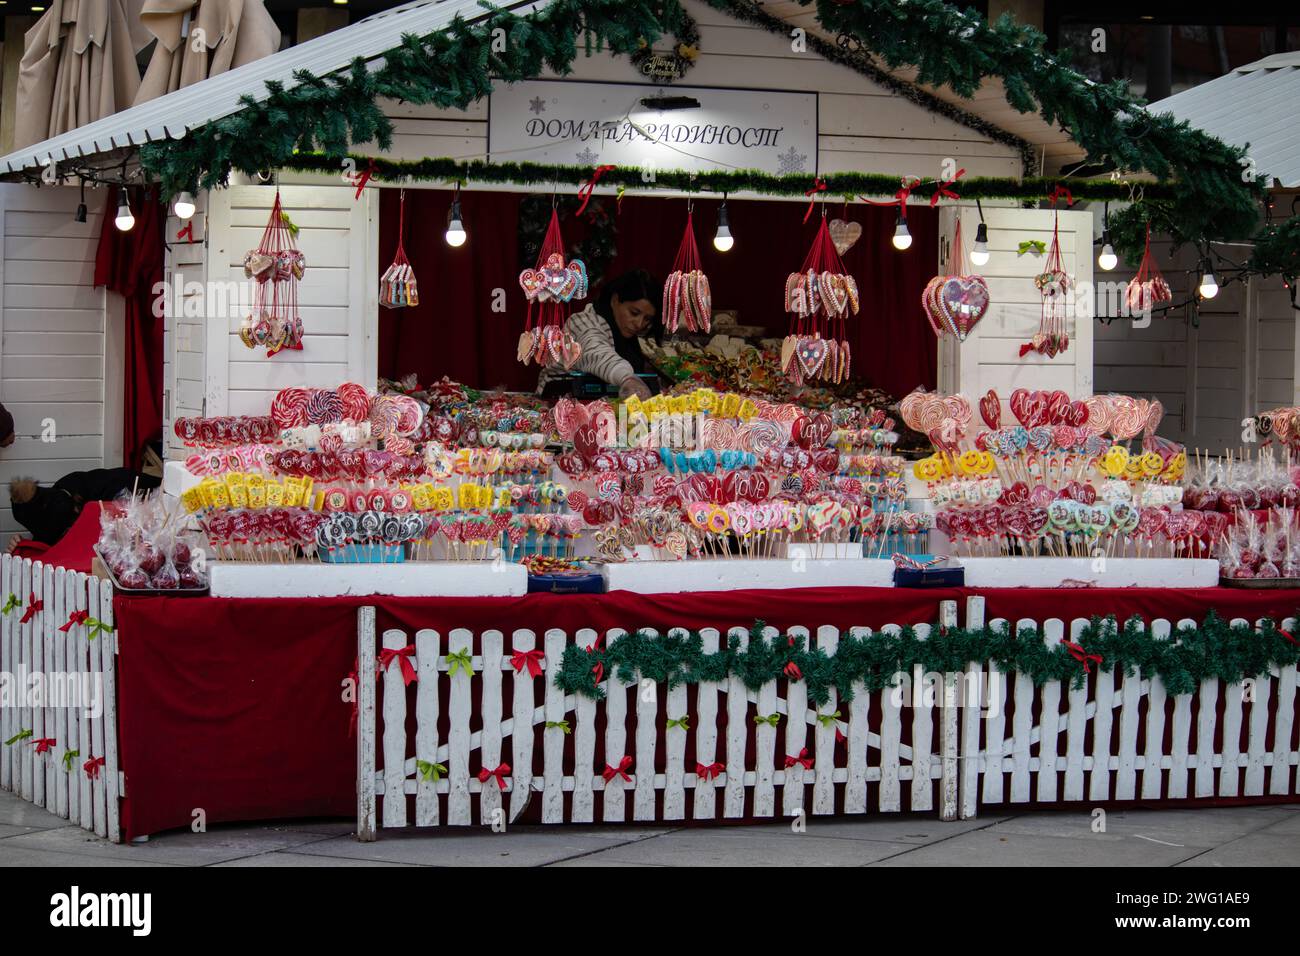 Colorful and attractive street candy shop full of sweets, lollipops, cakes, gummies, during winter holidays, New Year and Christmas season Stock Photo